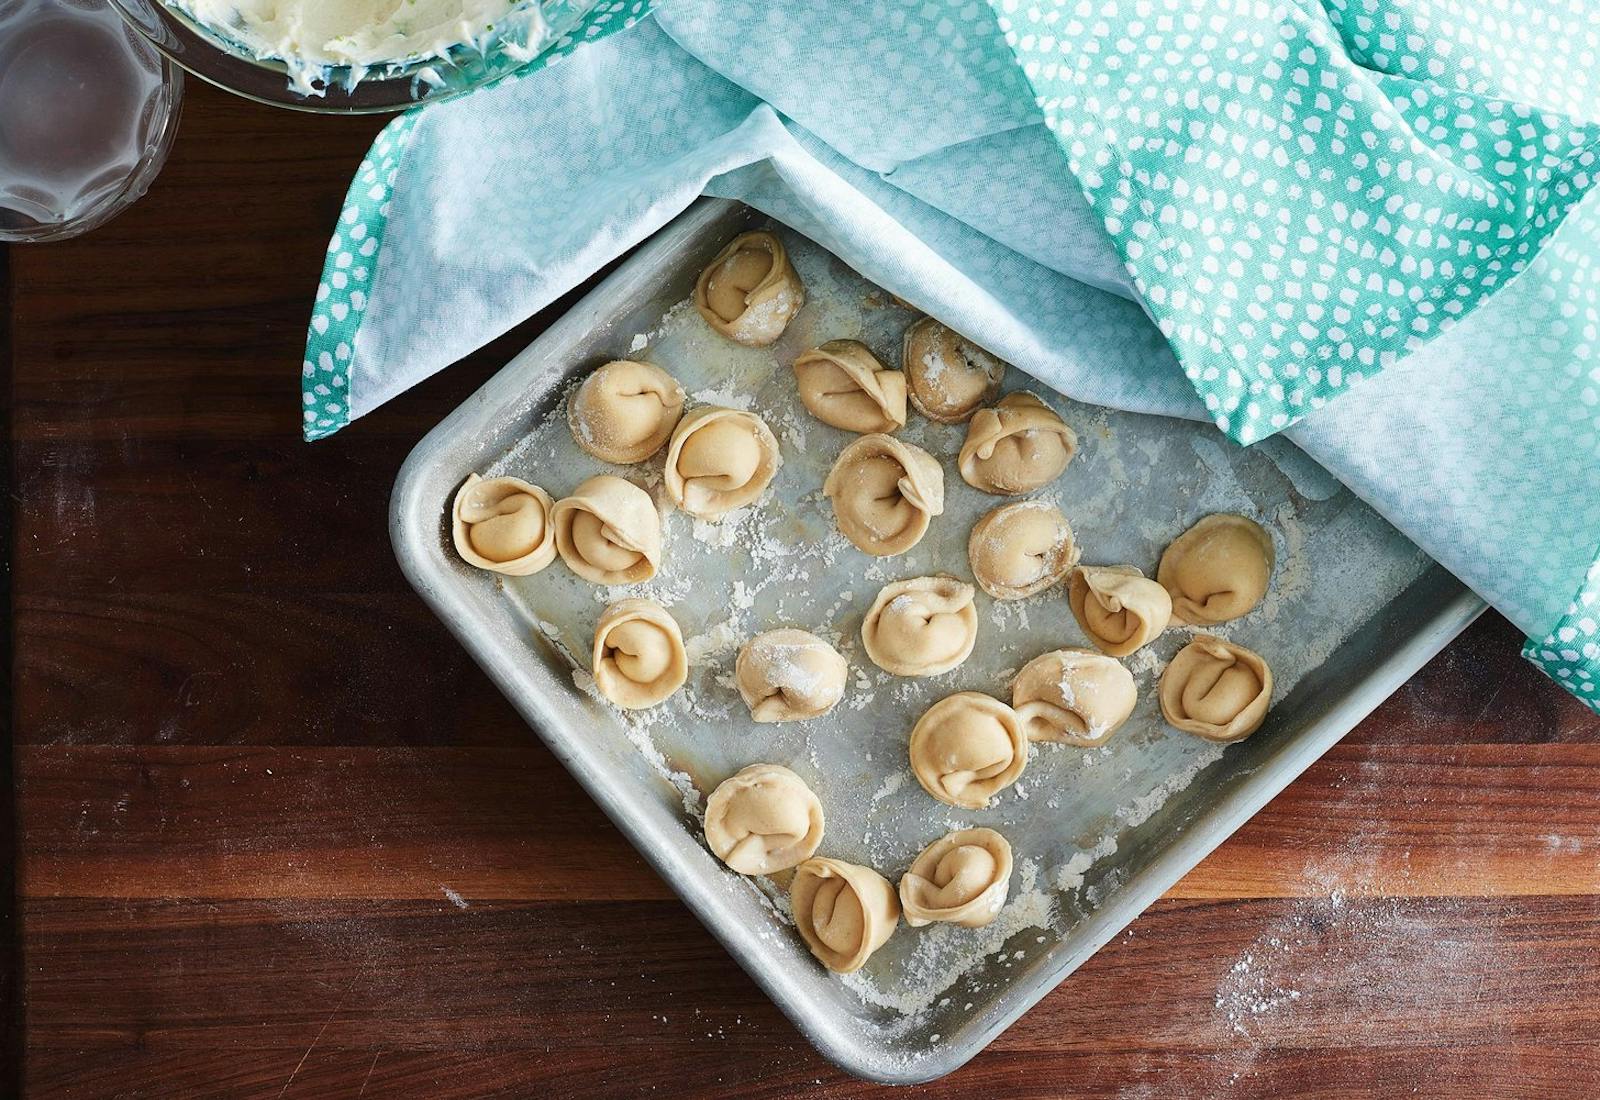 Flour-coated baking pan with uncooked cheese vareniki, blue and white kitchen cloth draped over dumplings, atop wooden surface.